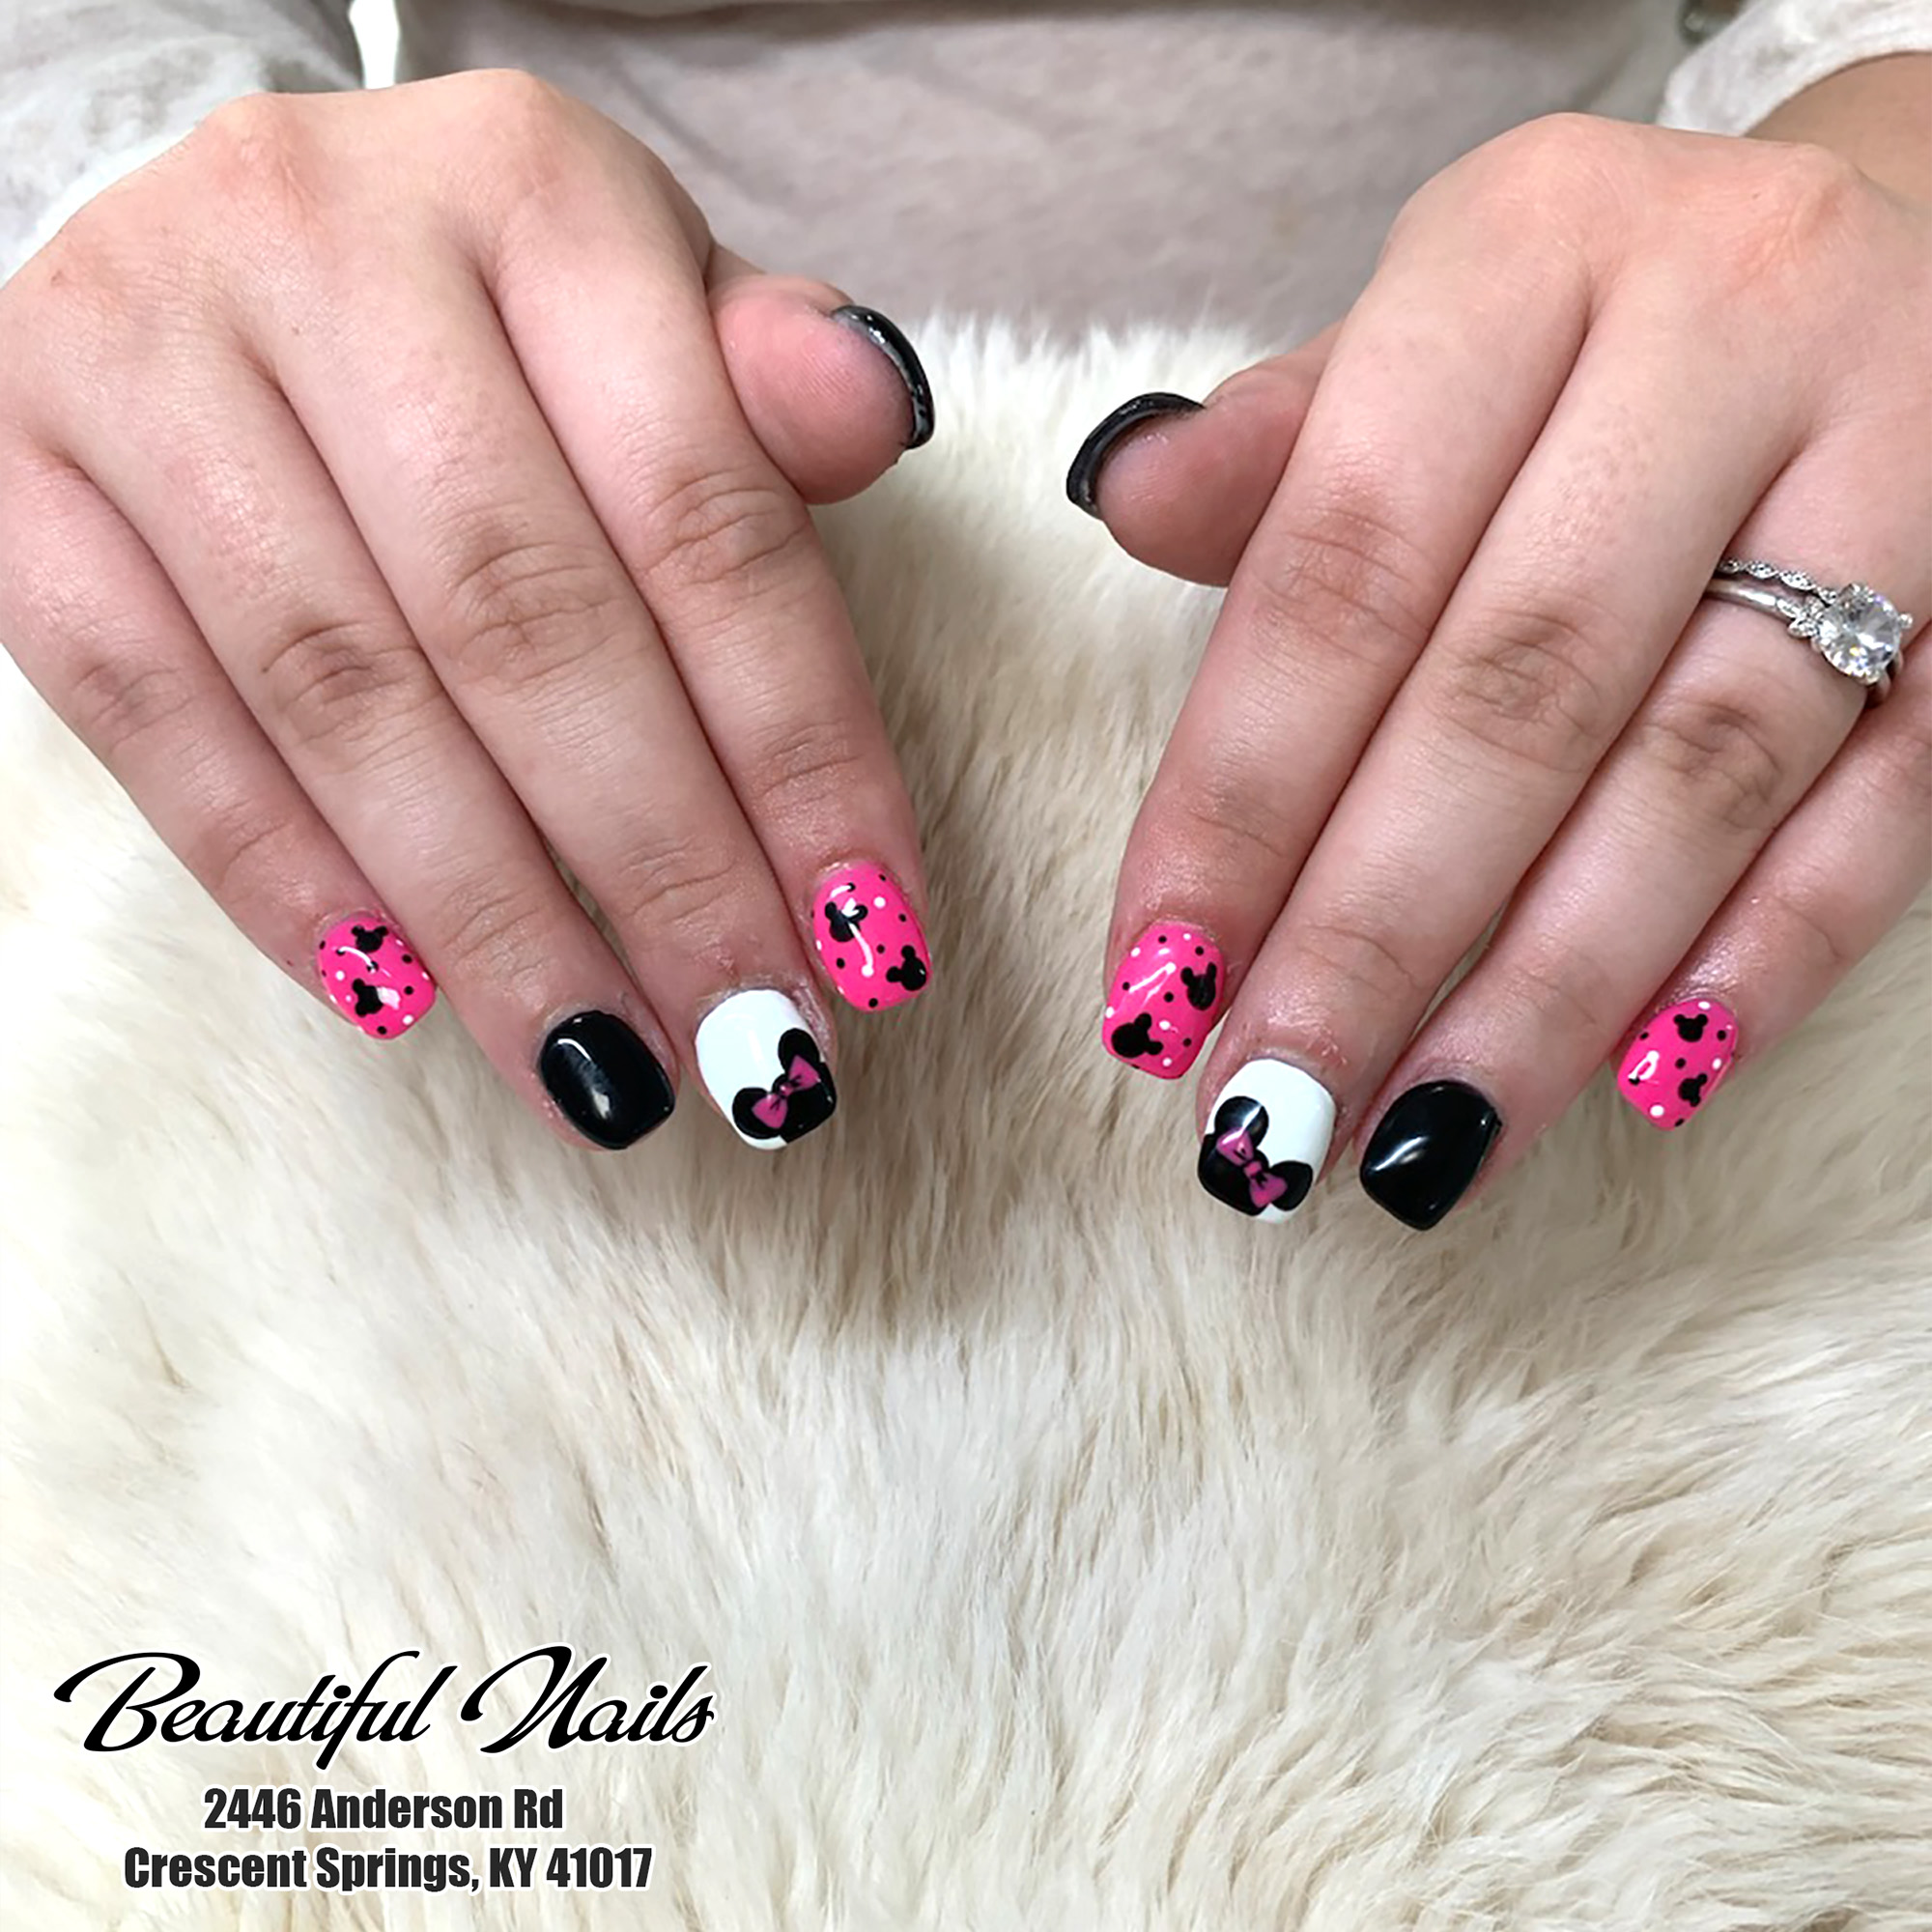 Beautiful Nails 2446 Anderson Rd, Crescent Springs Kentucky 41017